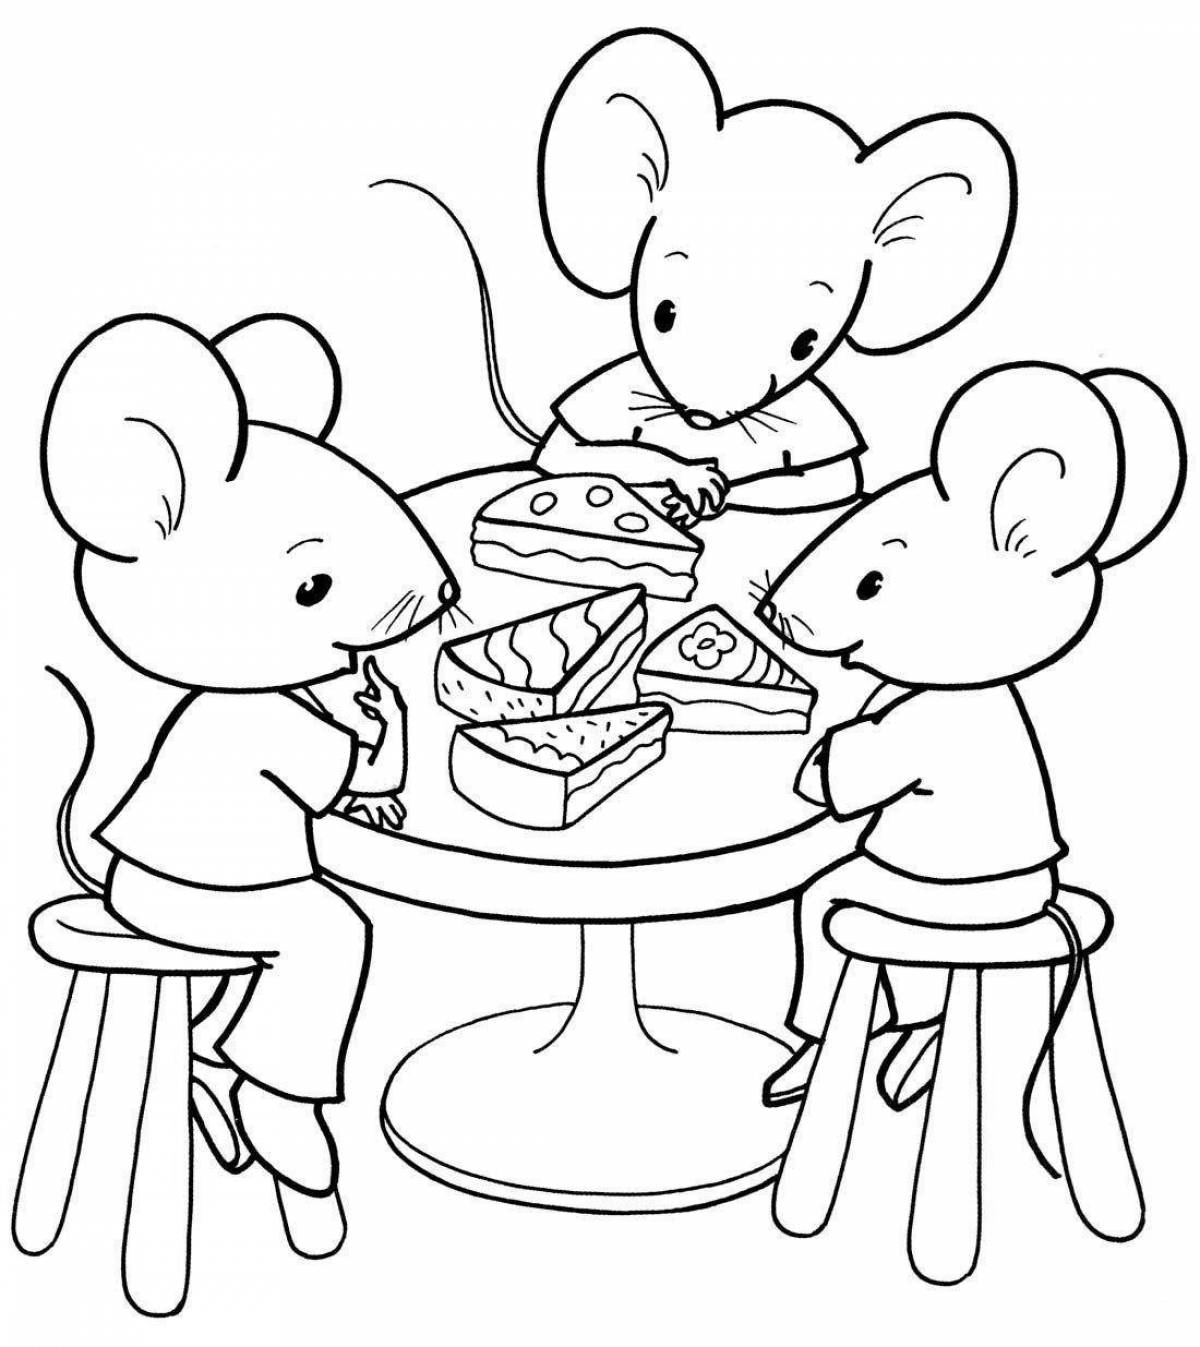 Coloring page holiday table for preschoolers